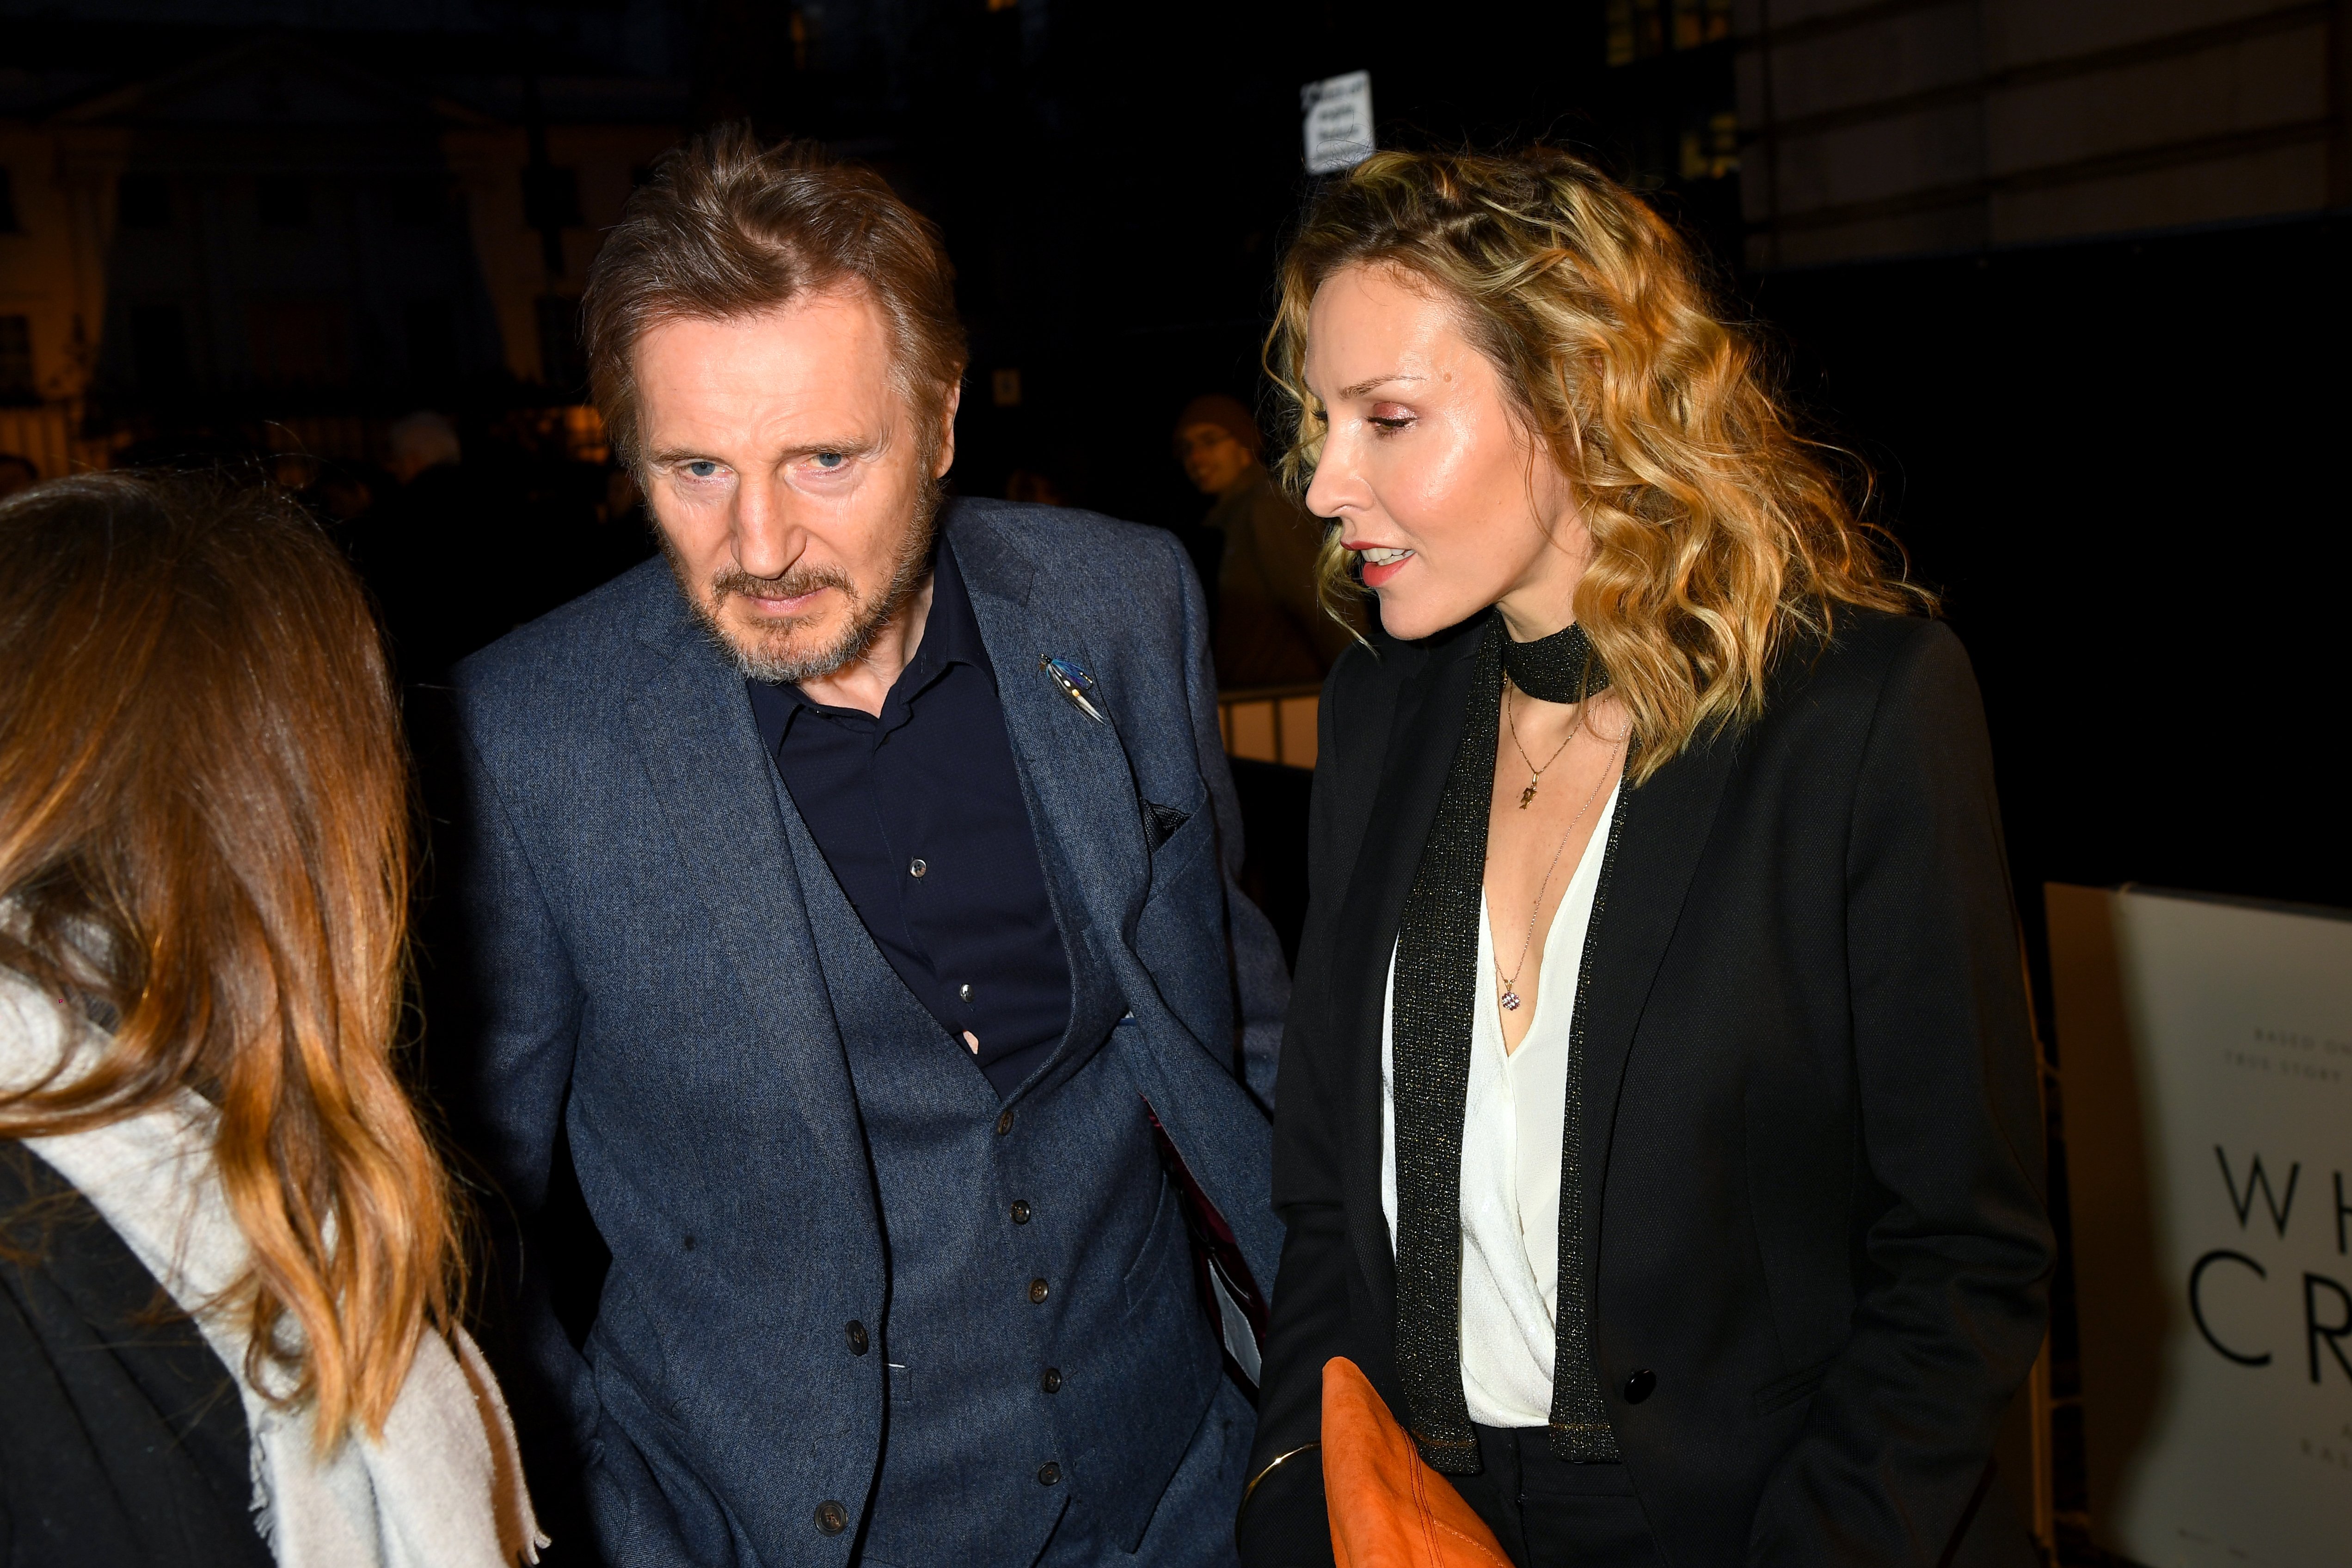 Liam Neeson and Freya St Johnston during "The White Crow" UK premiere held at The Curzon Mayfair on March 12, 2019 in London, England. / Source: Getty Images